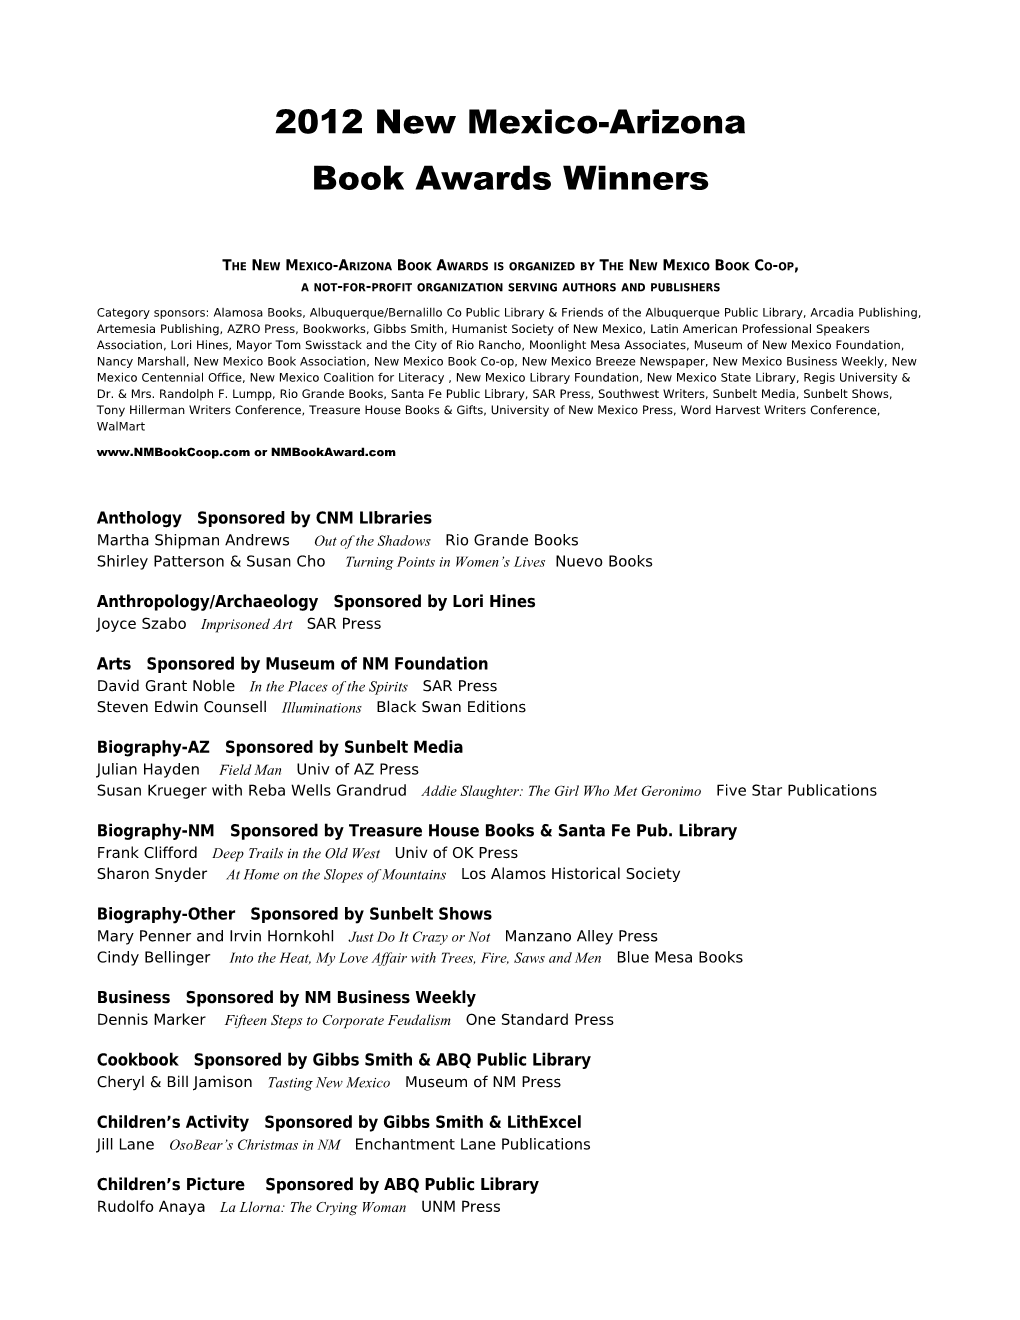 The New Mexico-Arizona Book Awards Is Organized by the New Mexico Book Co-Op